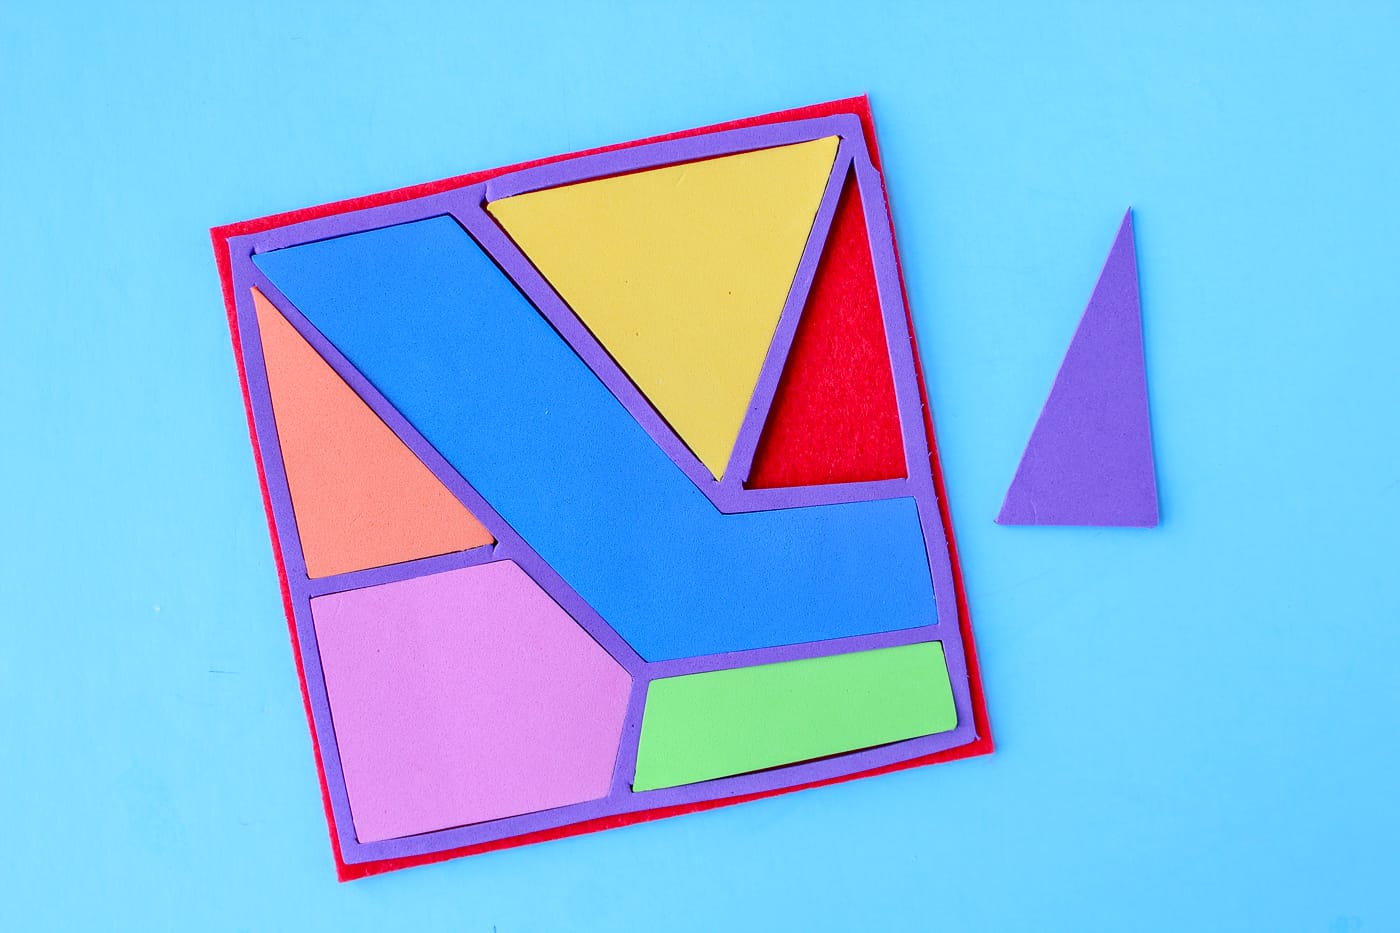 Rainbow Puzzles Pattern and Tutorial is a great way to fun activity with you that is fun for the kids but also stimulating and great for their brains! You can make these from tons of different materials to make it a fun sensory experience as well! #kidscrafts #learningcraftsforkids